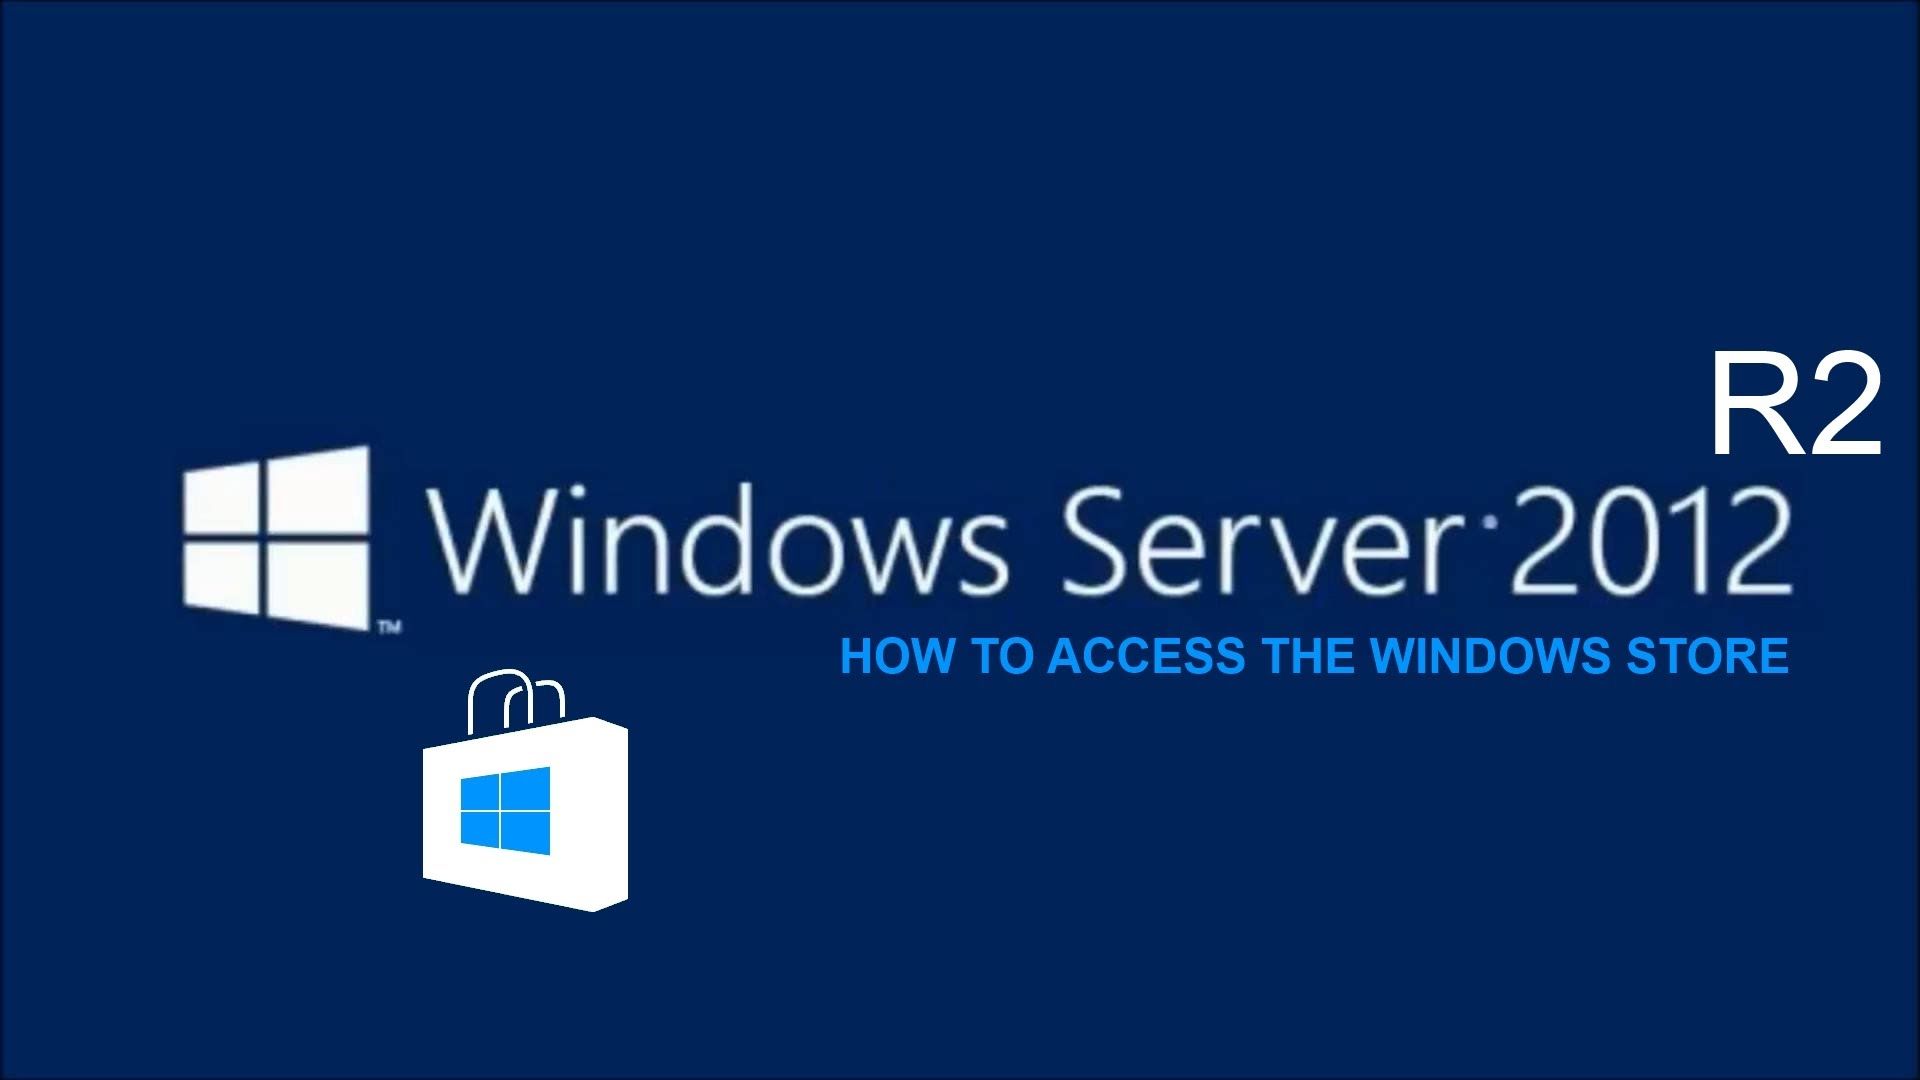 Free download Windows Server 2012 R2 How to Activate the Windows Store [1920x1080] for your Desktop, Mobile & Tablet. Explore Windows Server 2012 R2 Wallpaper. Windows Server 2012 Wallpaper Location, Change Wallpaper Server 2012 R